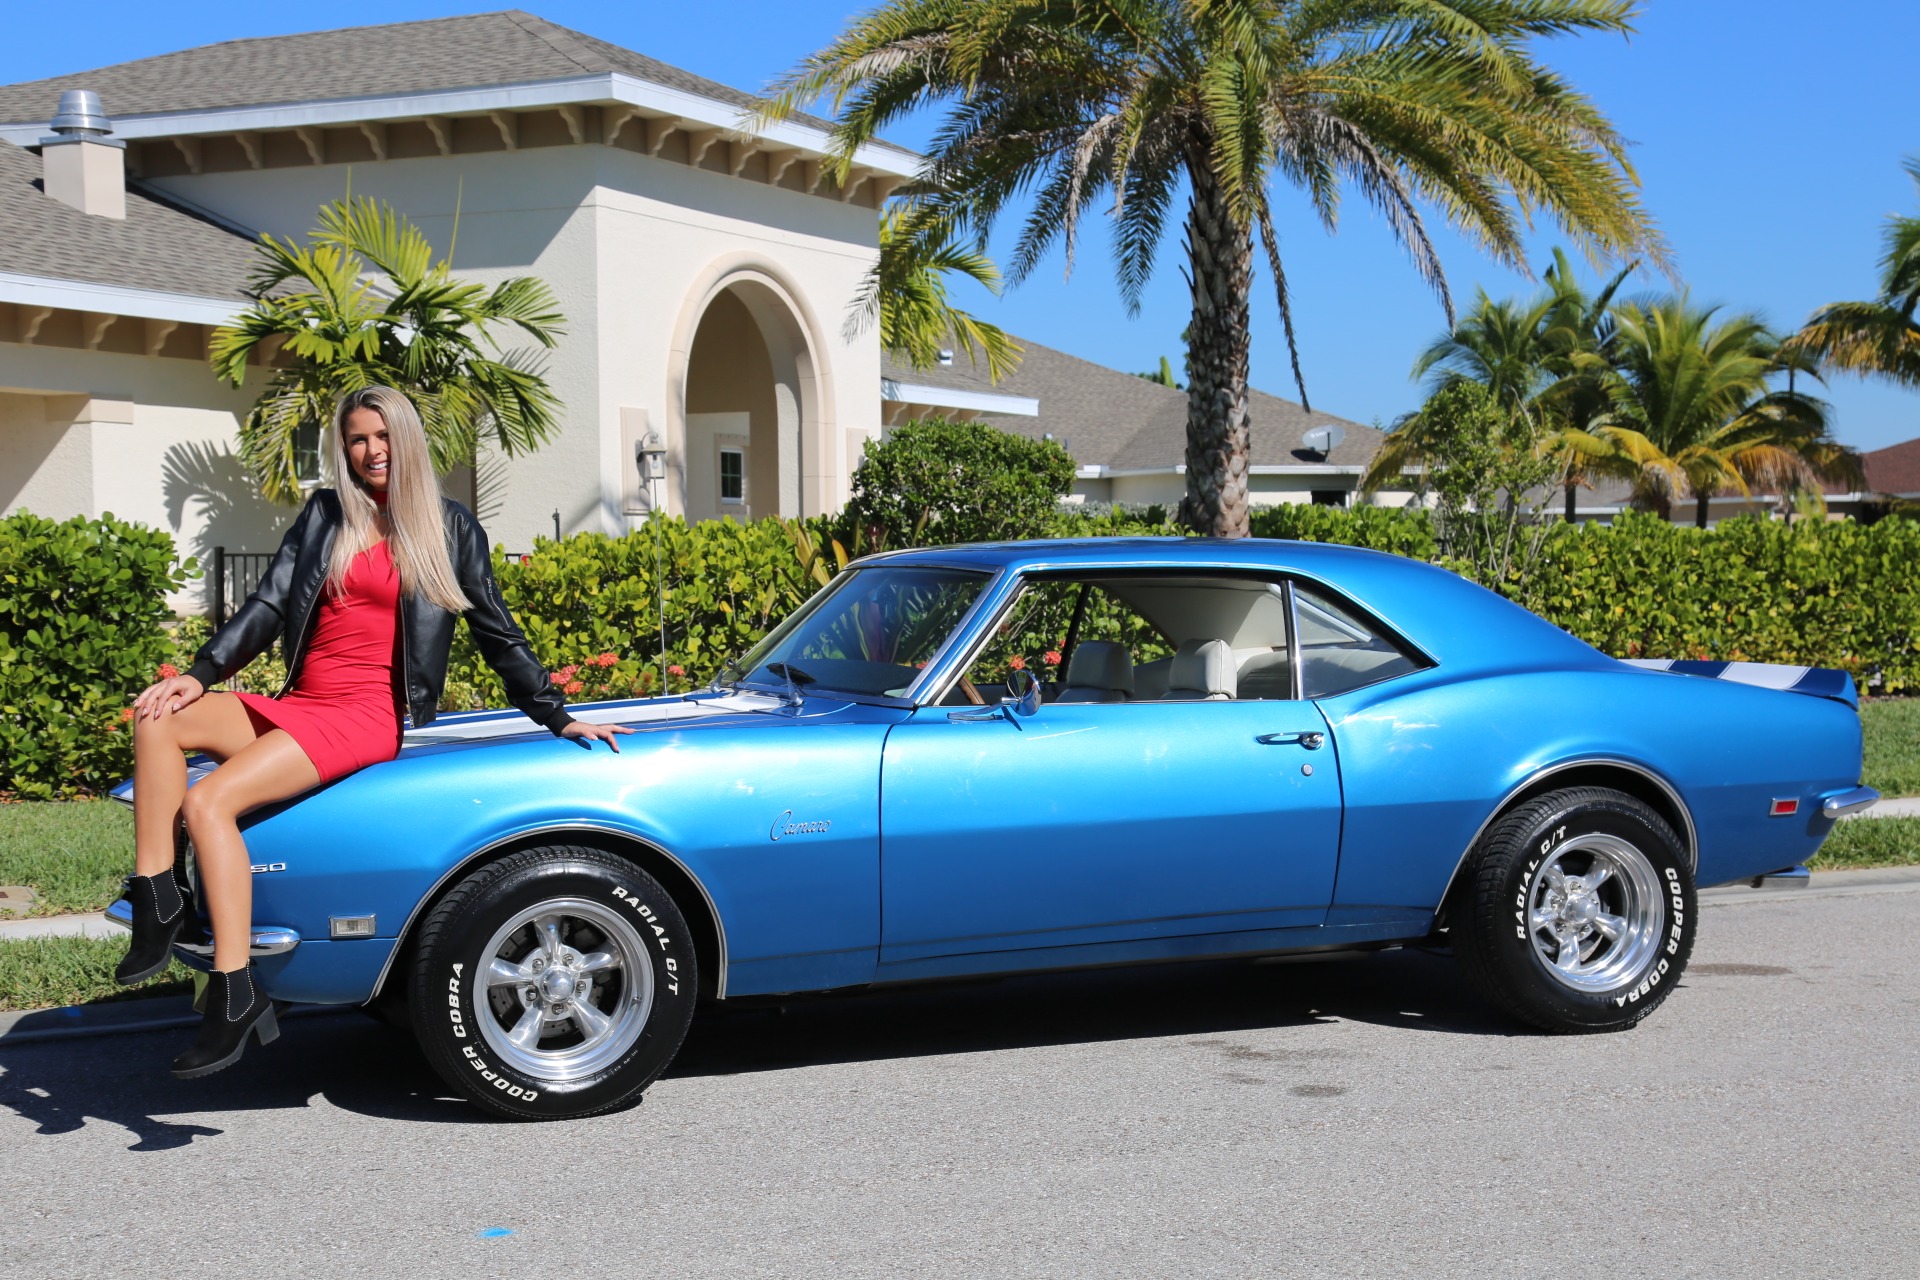 Used 1968 Chevy Camaro Coupe 4 Speed manual 350 stroked to 383 Engine AC for sale Sold at Muscle Cars for Sale Inc. in Fort Myers FL 33912 5